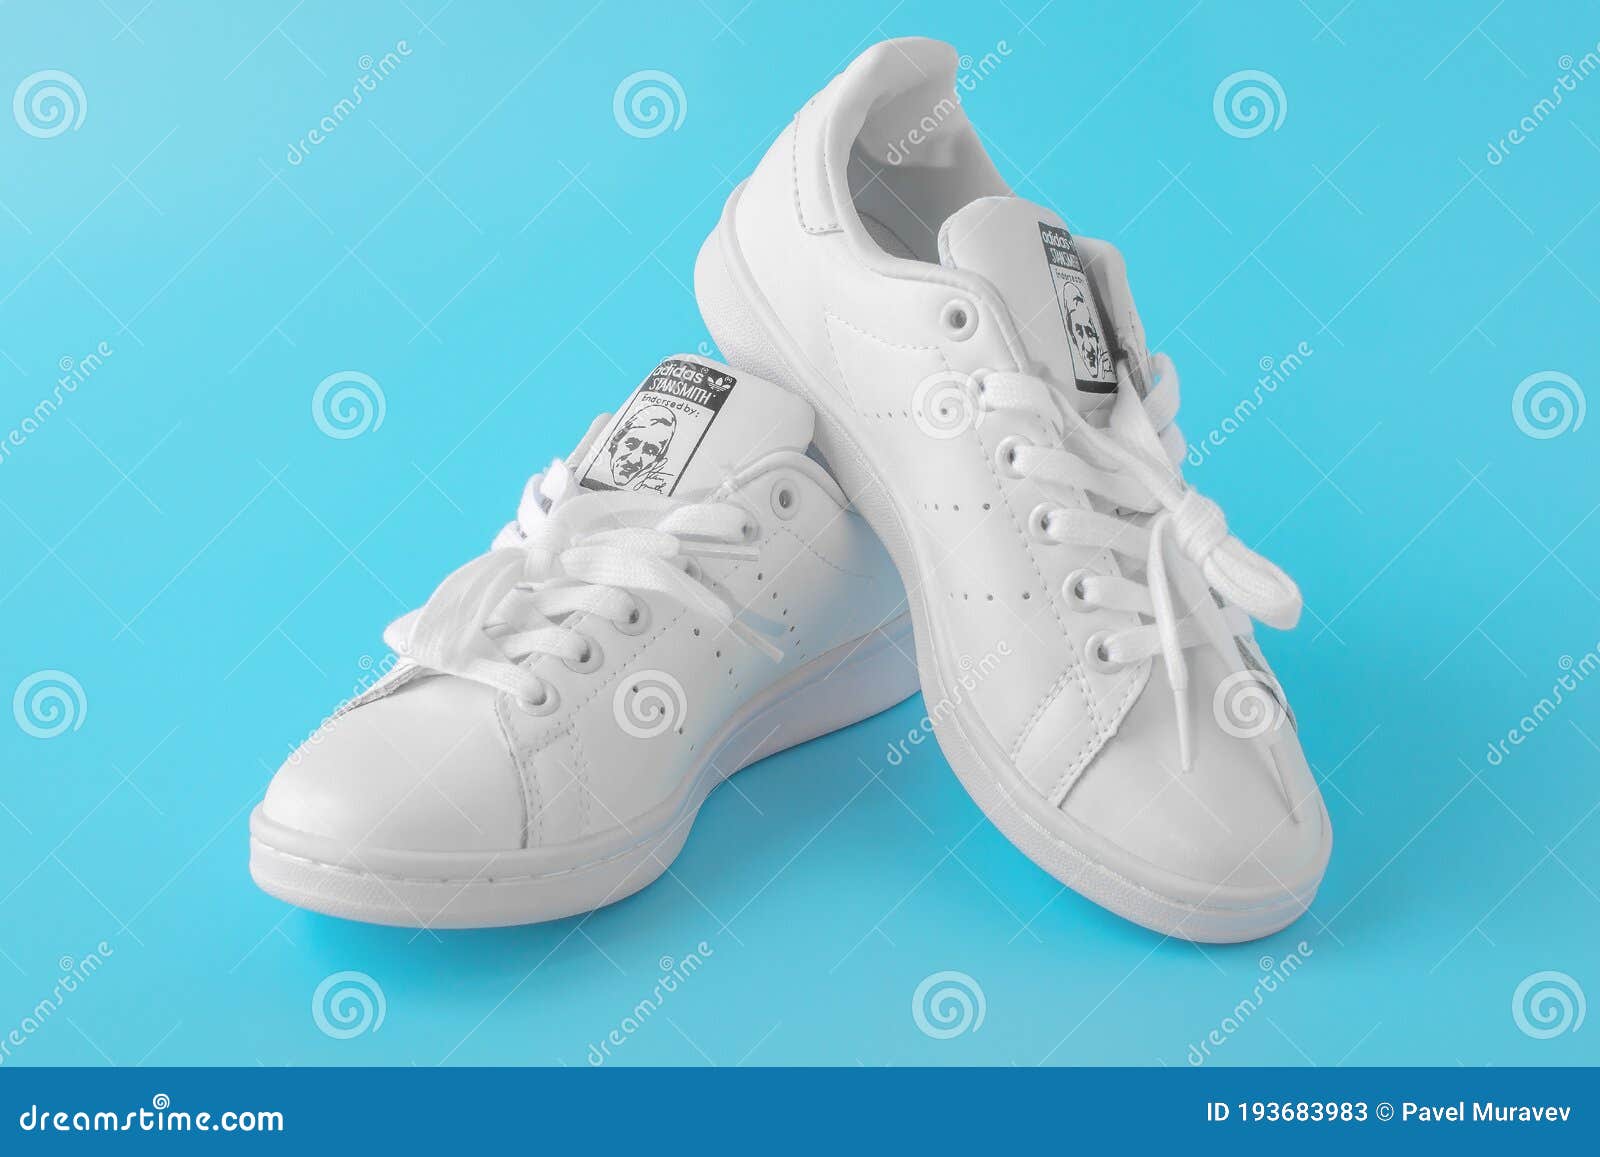 Moscow, Russia - JULY 30, 2020: White Shoes Adidas Smith, Photo of New White Sneakers on Blue Background Editorial Stock Photo - Image of casual, fitness: 193683983